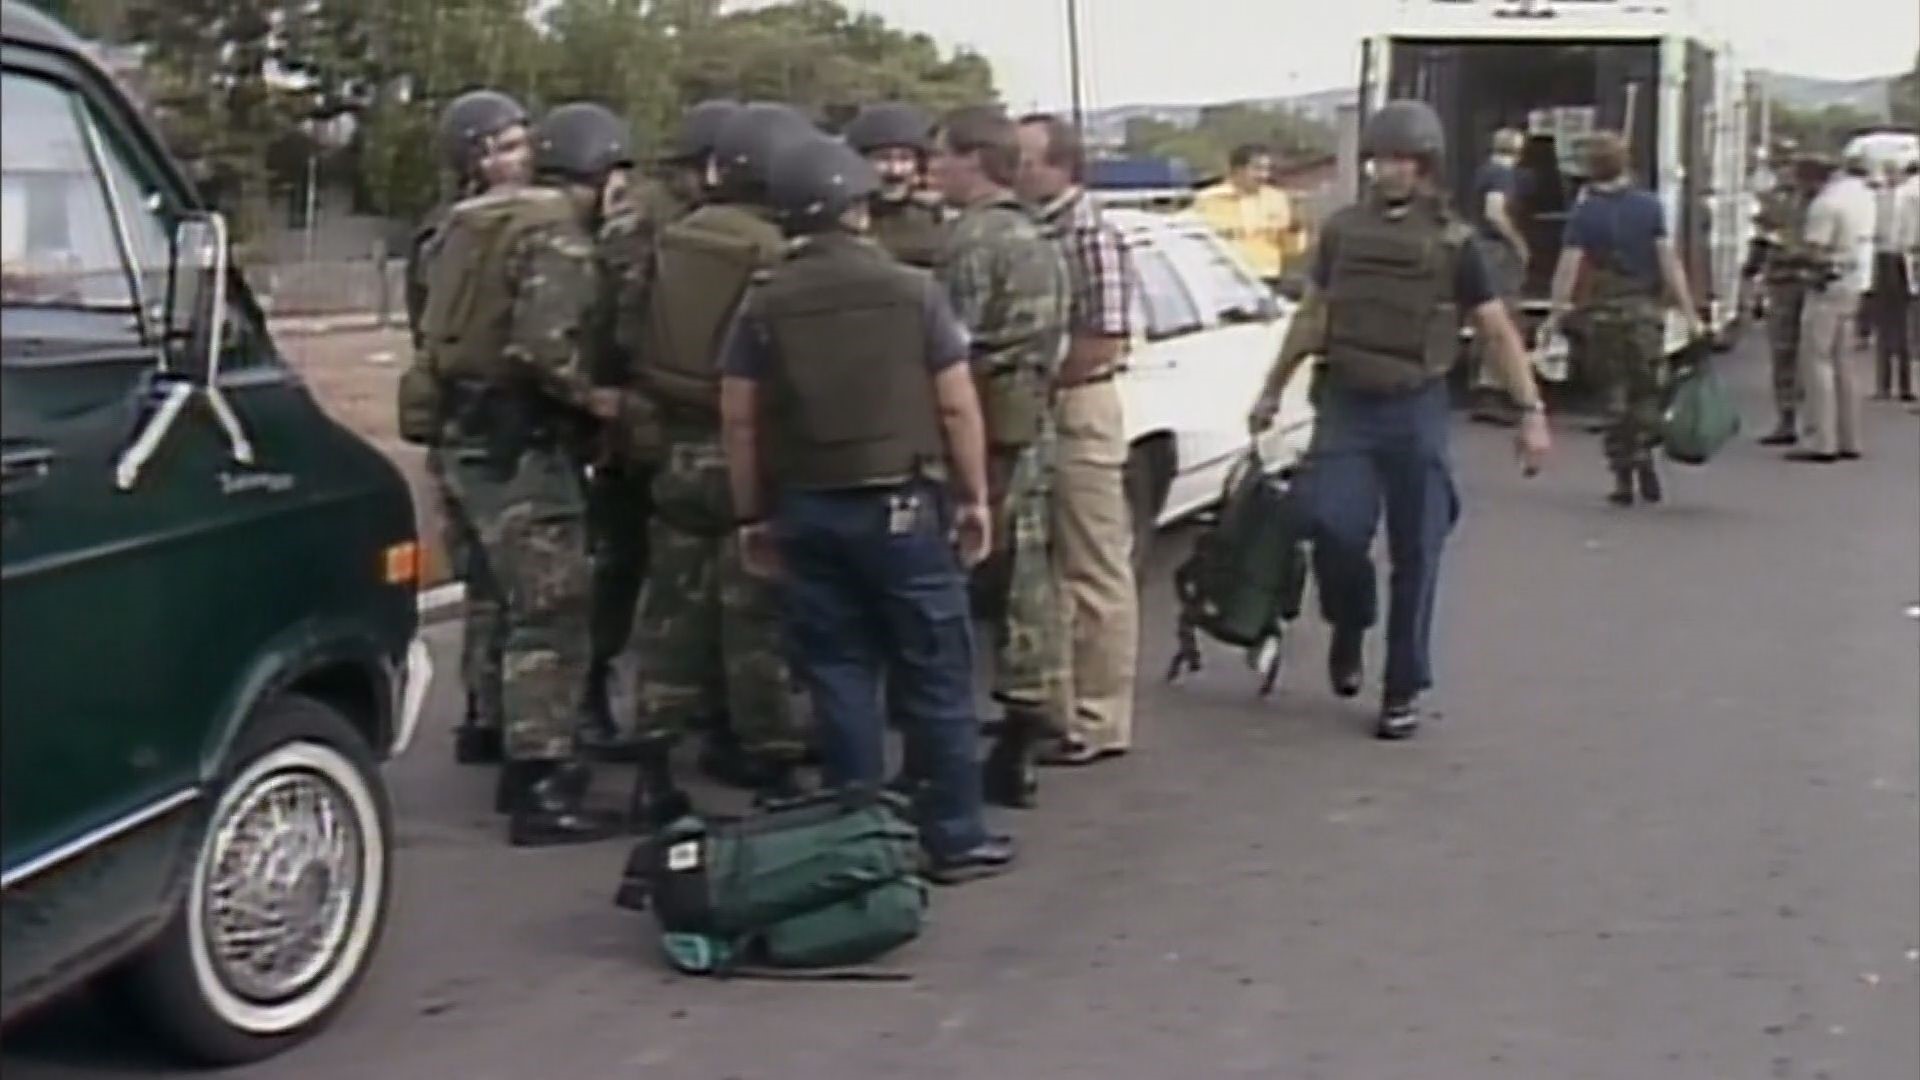 Officers asked News 8 for archive footage of the San Diego Police Department's most dangerous encounters to reflect on ahead of SWAT's anniversary next year.